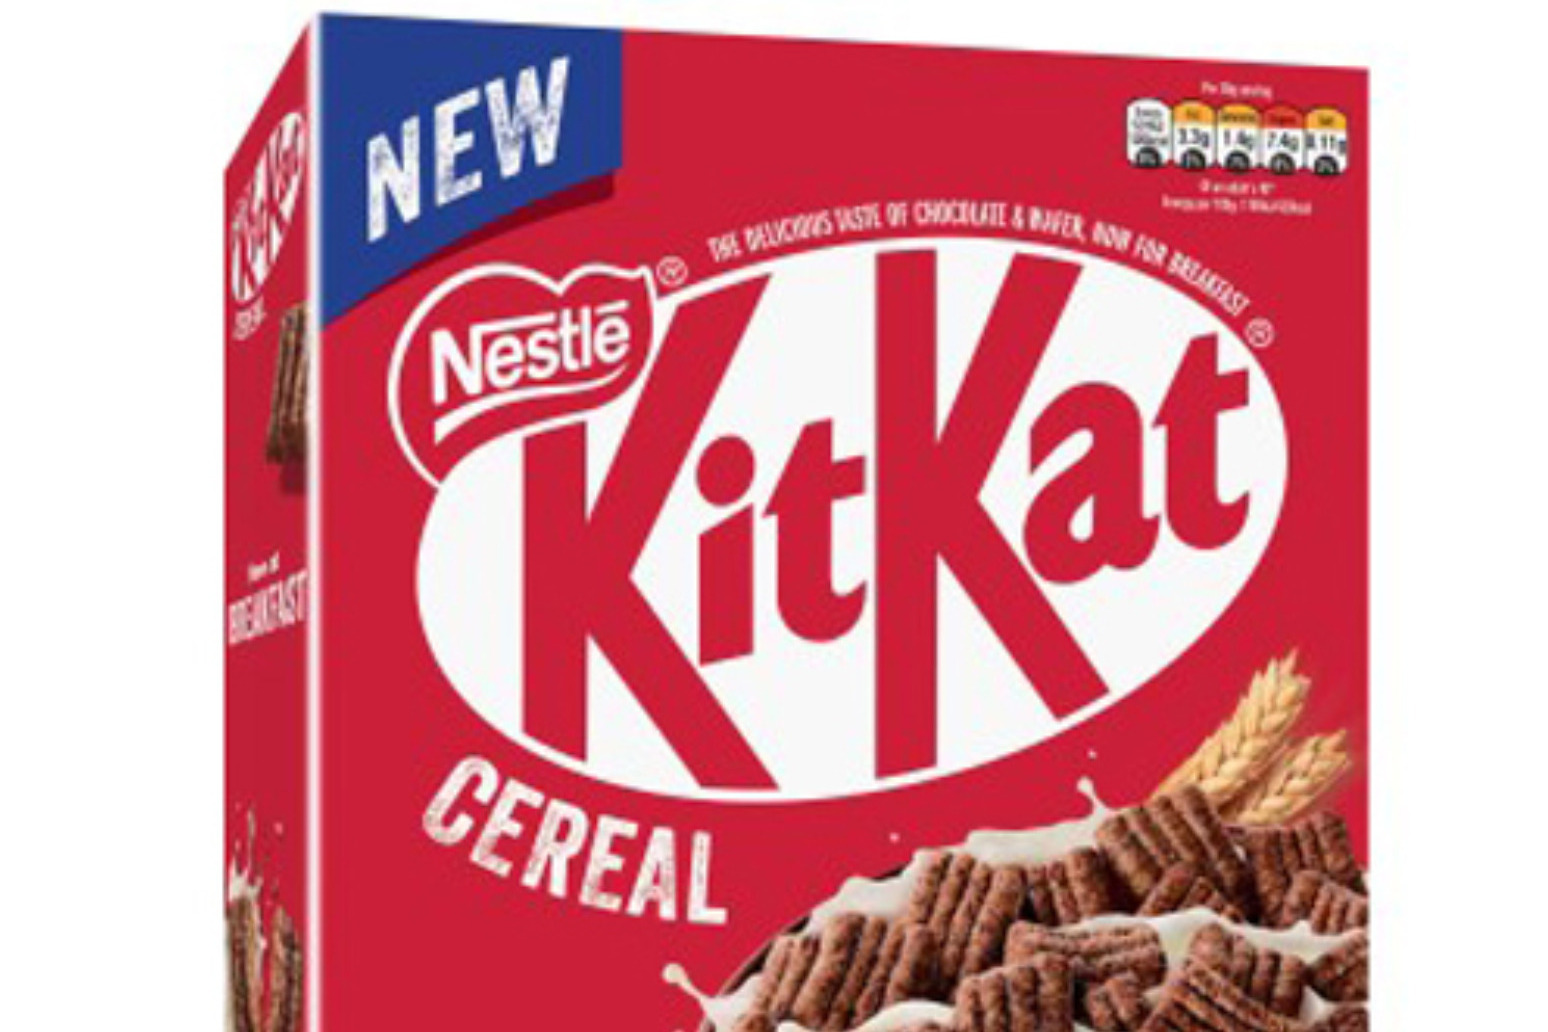 KitKat Cereal to launch in the UK next month 